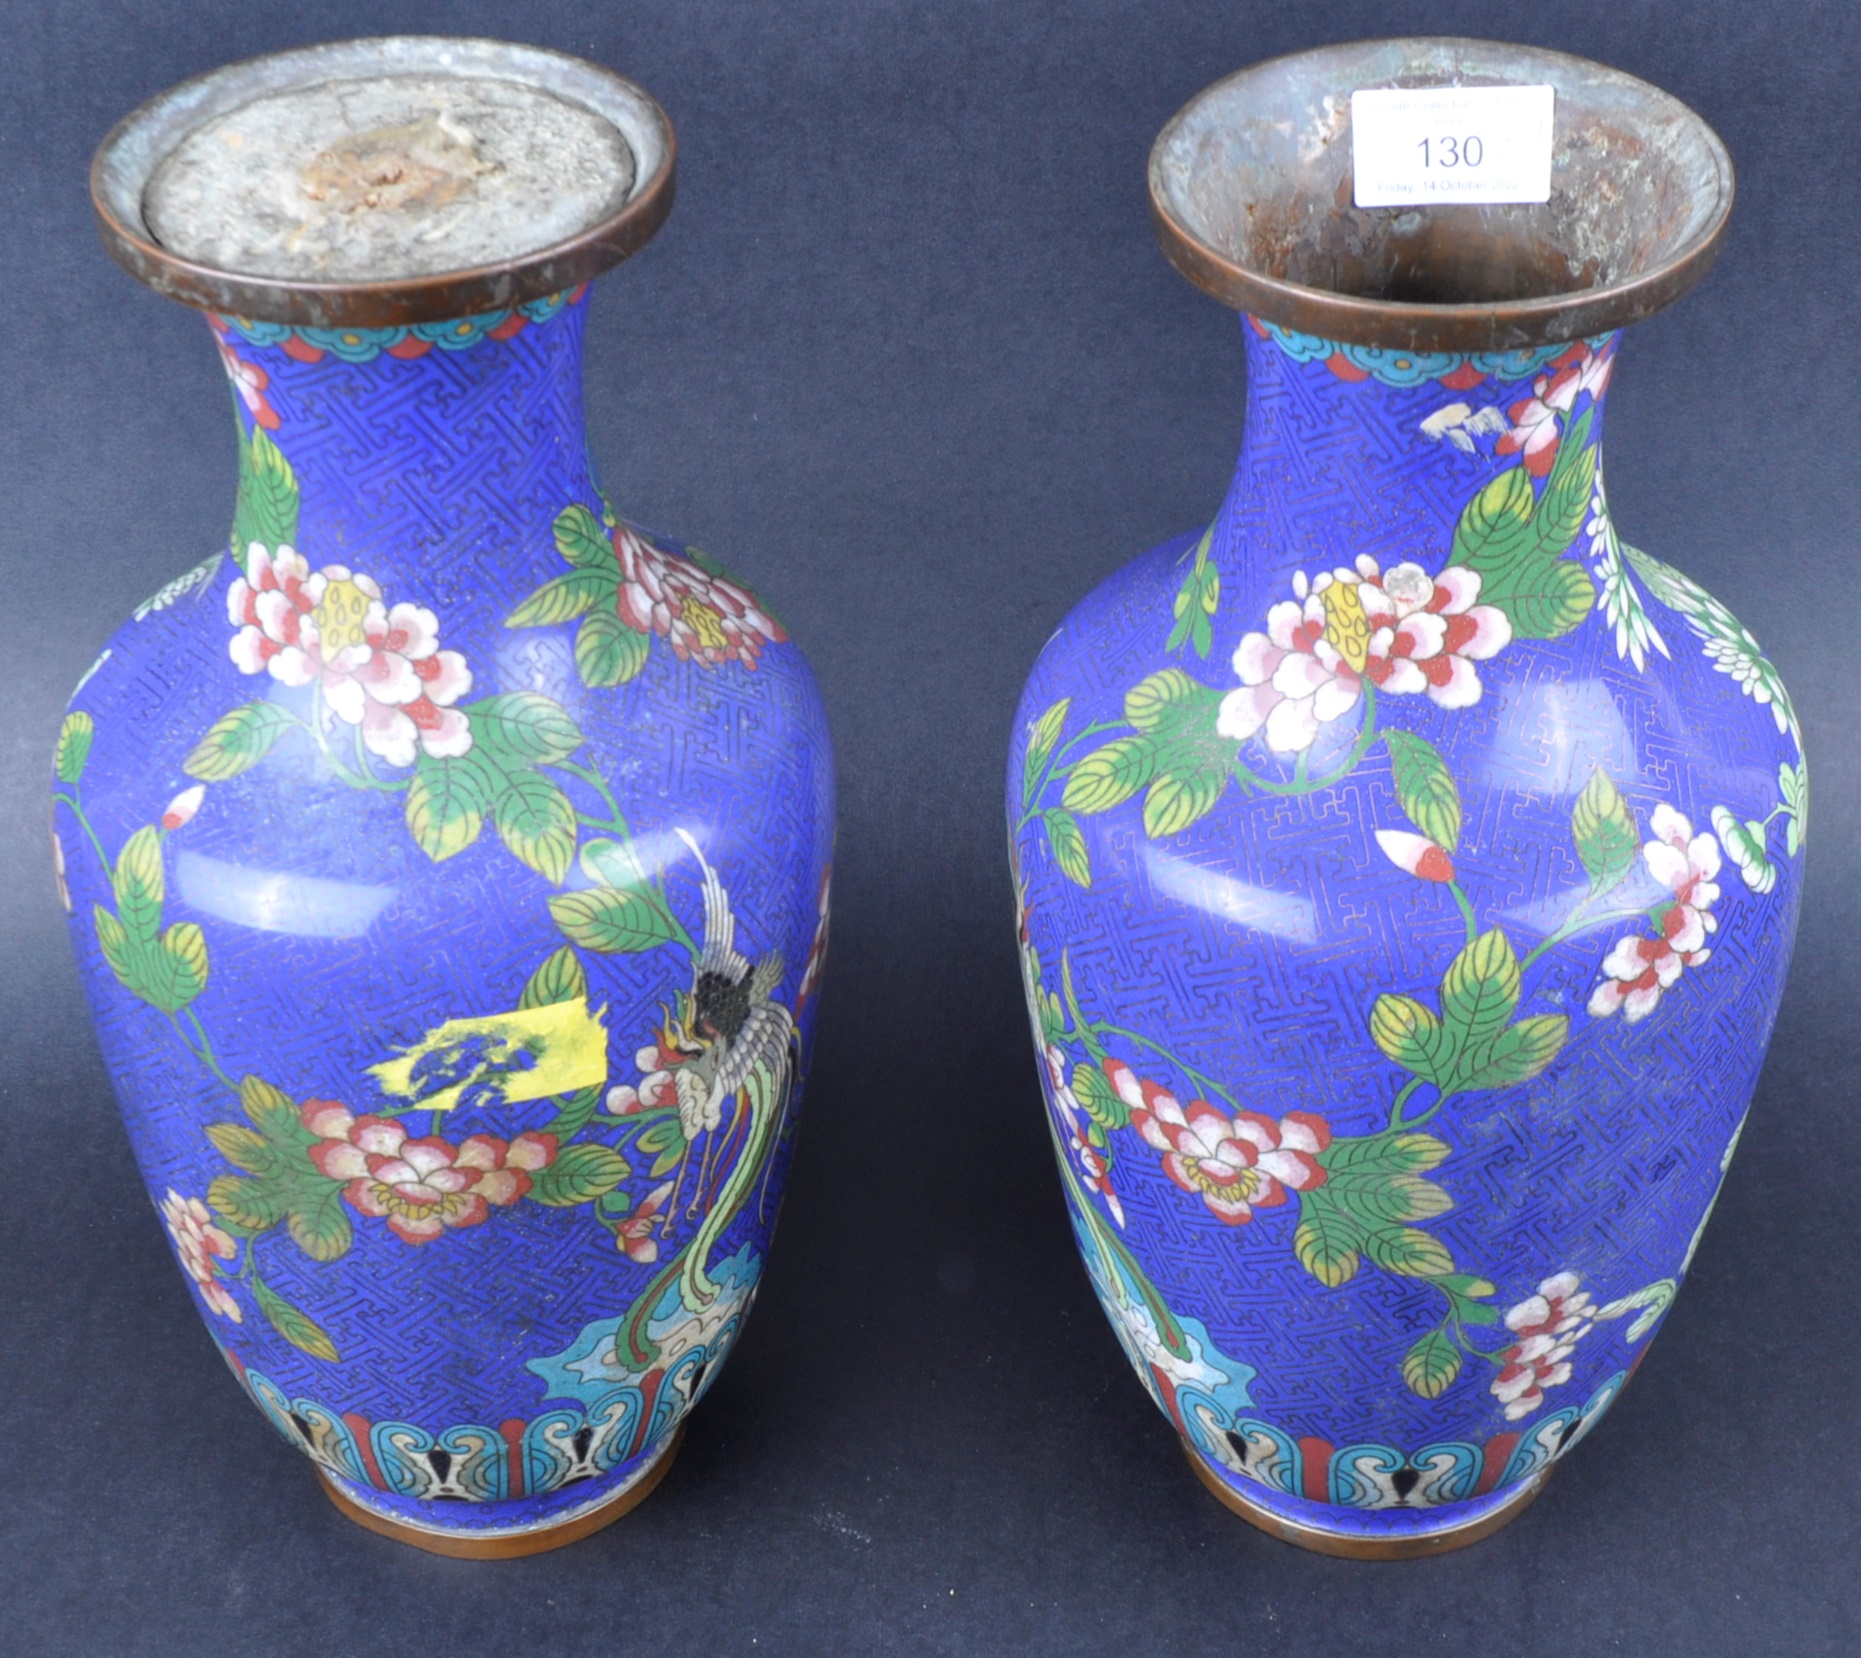 PAIR OF CHINESE CLOISONNE VASES - Image 2 of 6